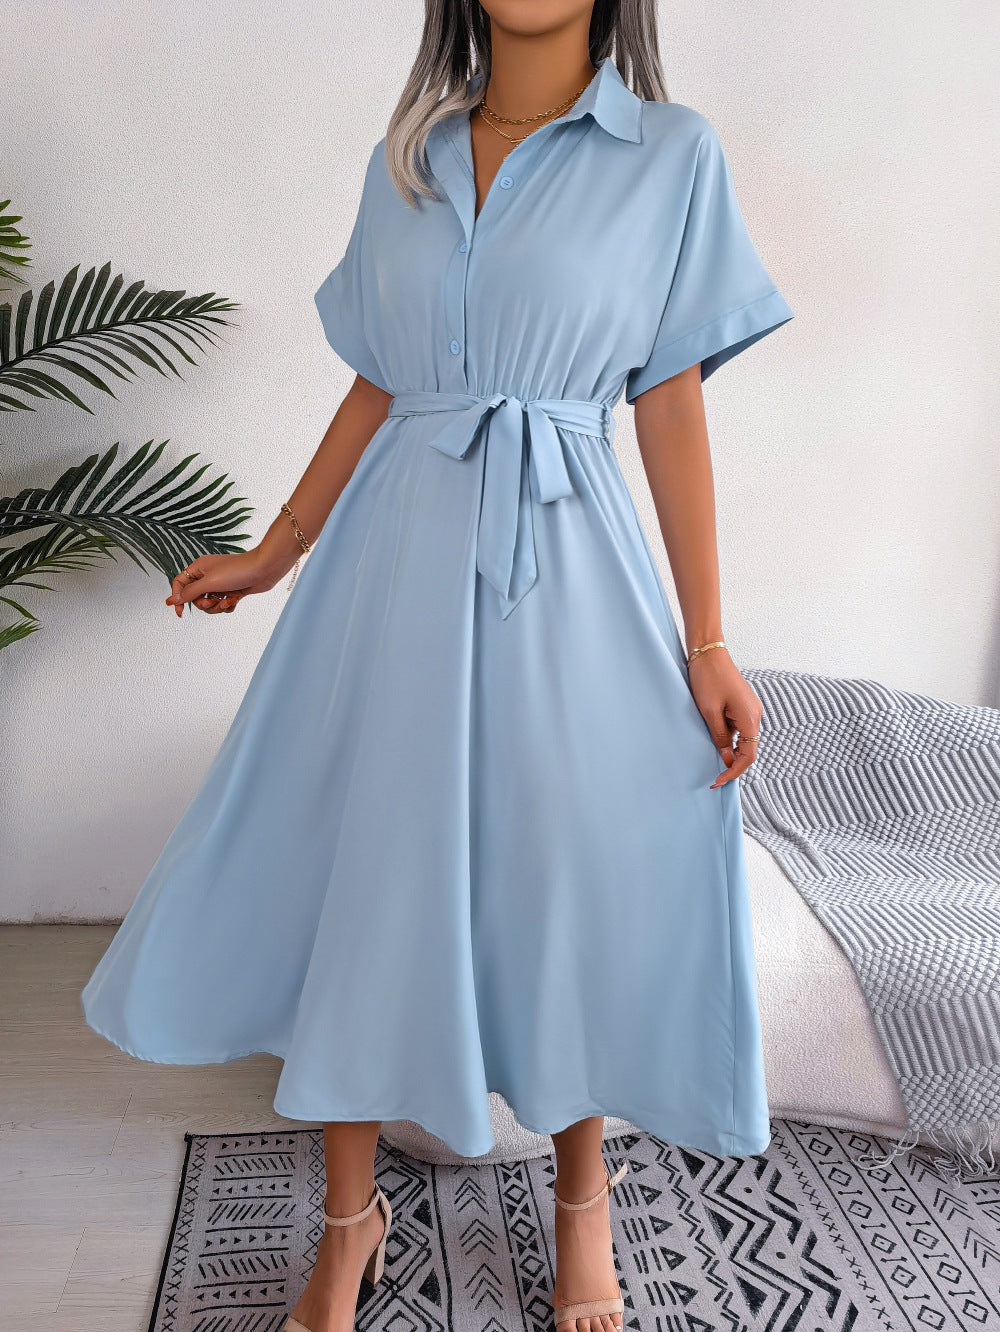 Summer Casual Loose Solid Color Tied Shirt Dress Maxi Dress Women Clothing